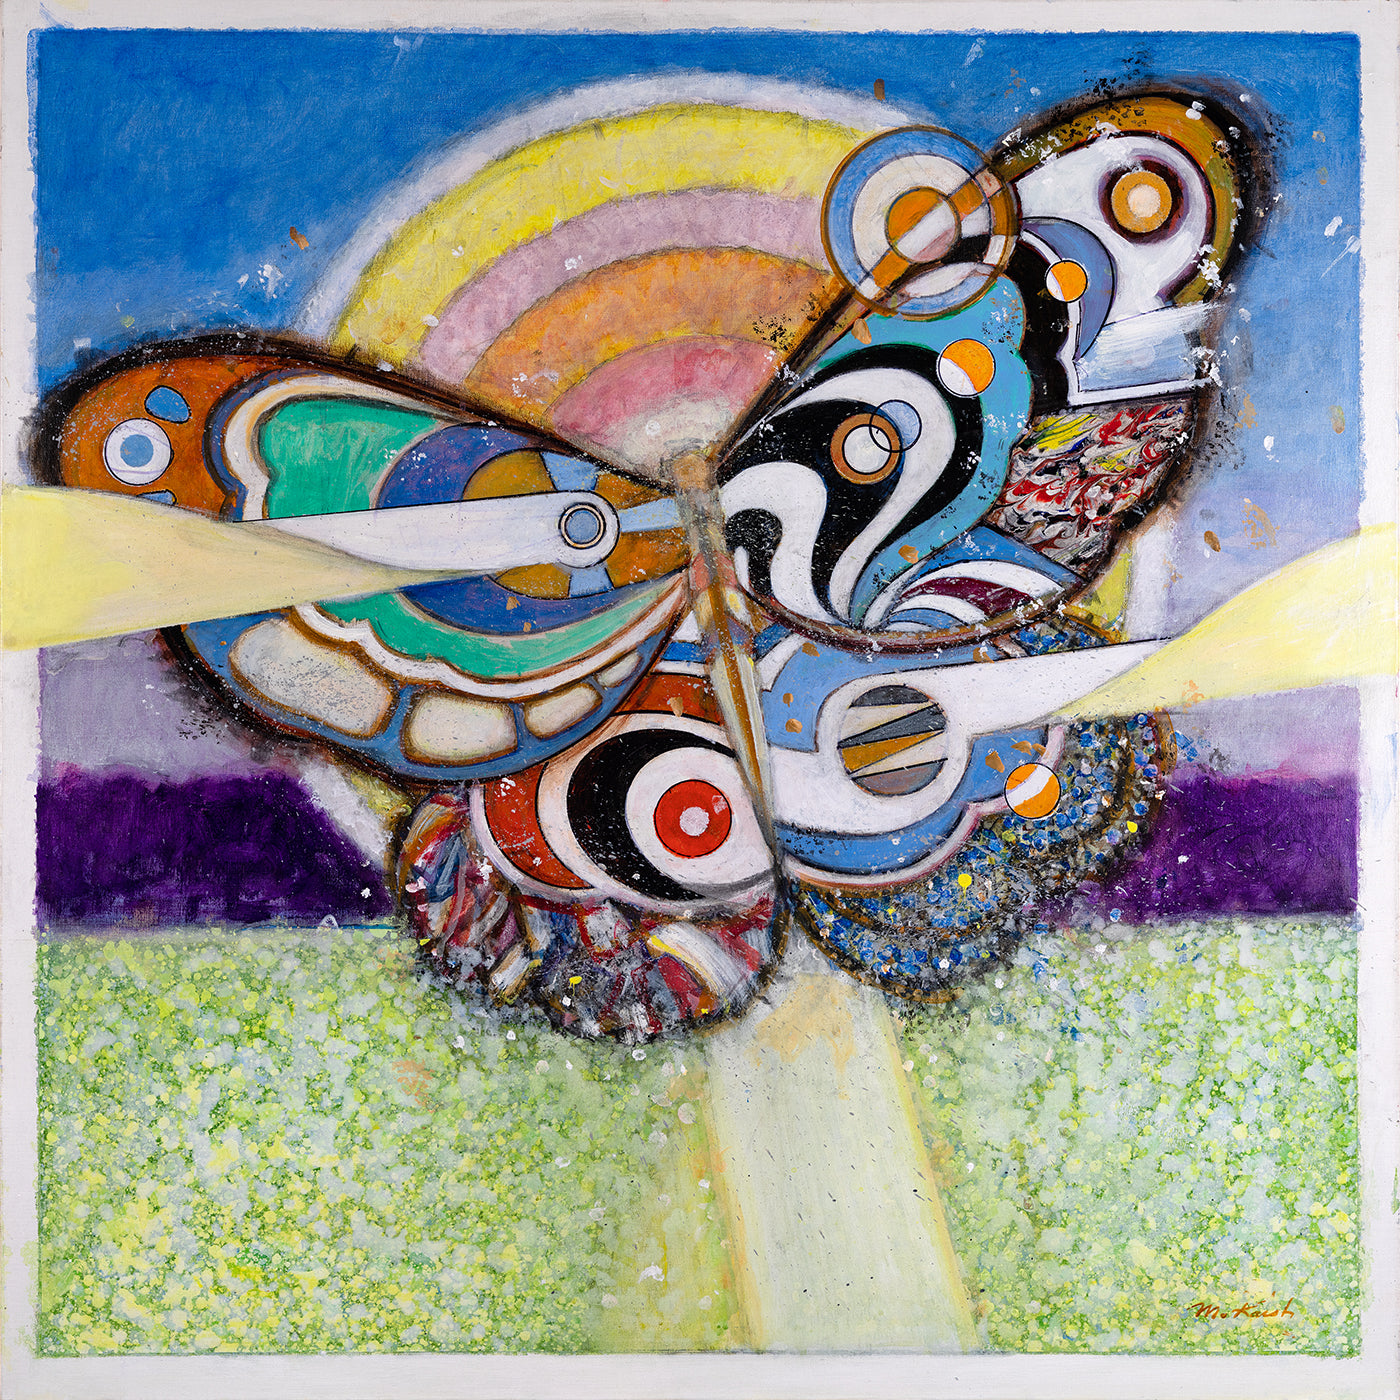 Morton Kaish (b. 1927-) Arrival IX, 2018 Oil on Linen 36 x 36 inches Framed: 37 x 37 x 2 inches; Butterfly abstraction ; Nature abstraction; Available at Manolis Projects Gallery